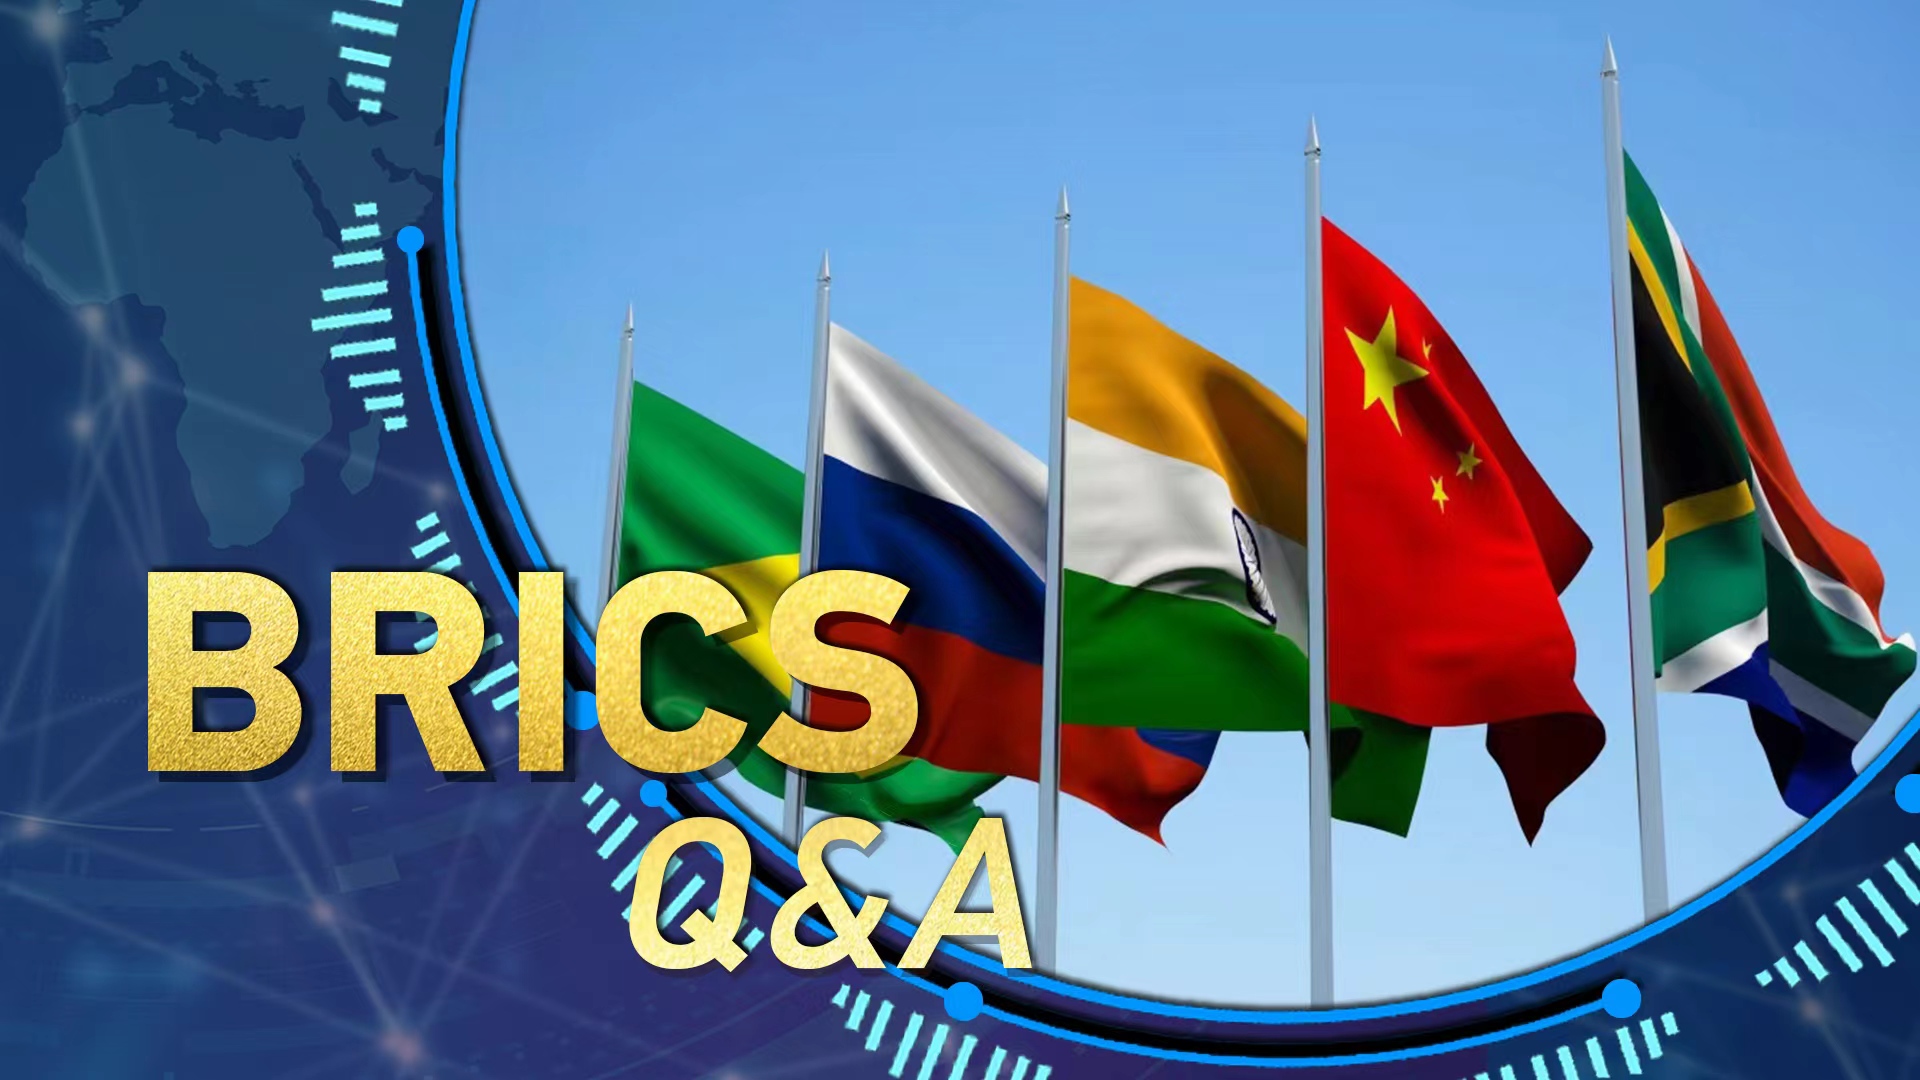 What role does NDB play in BRICS cooperation?